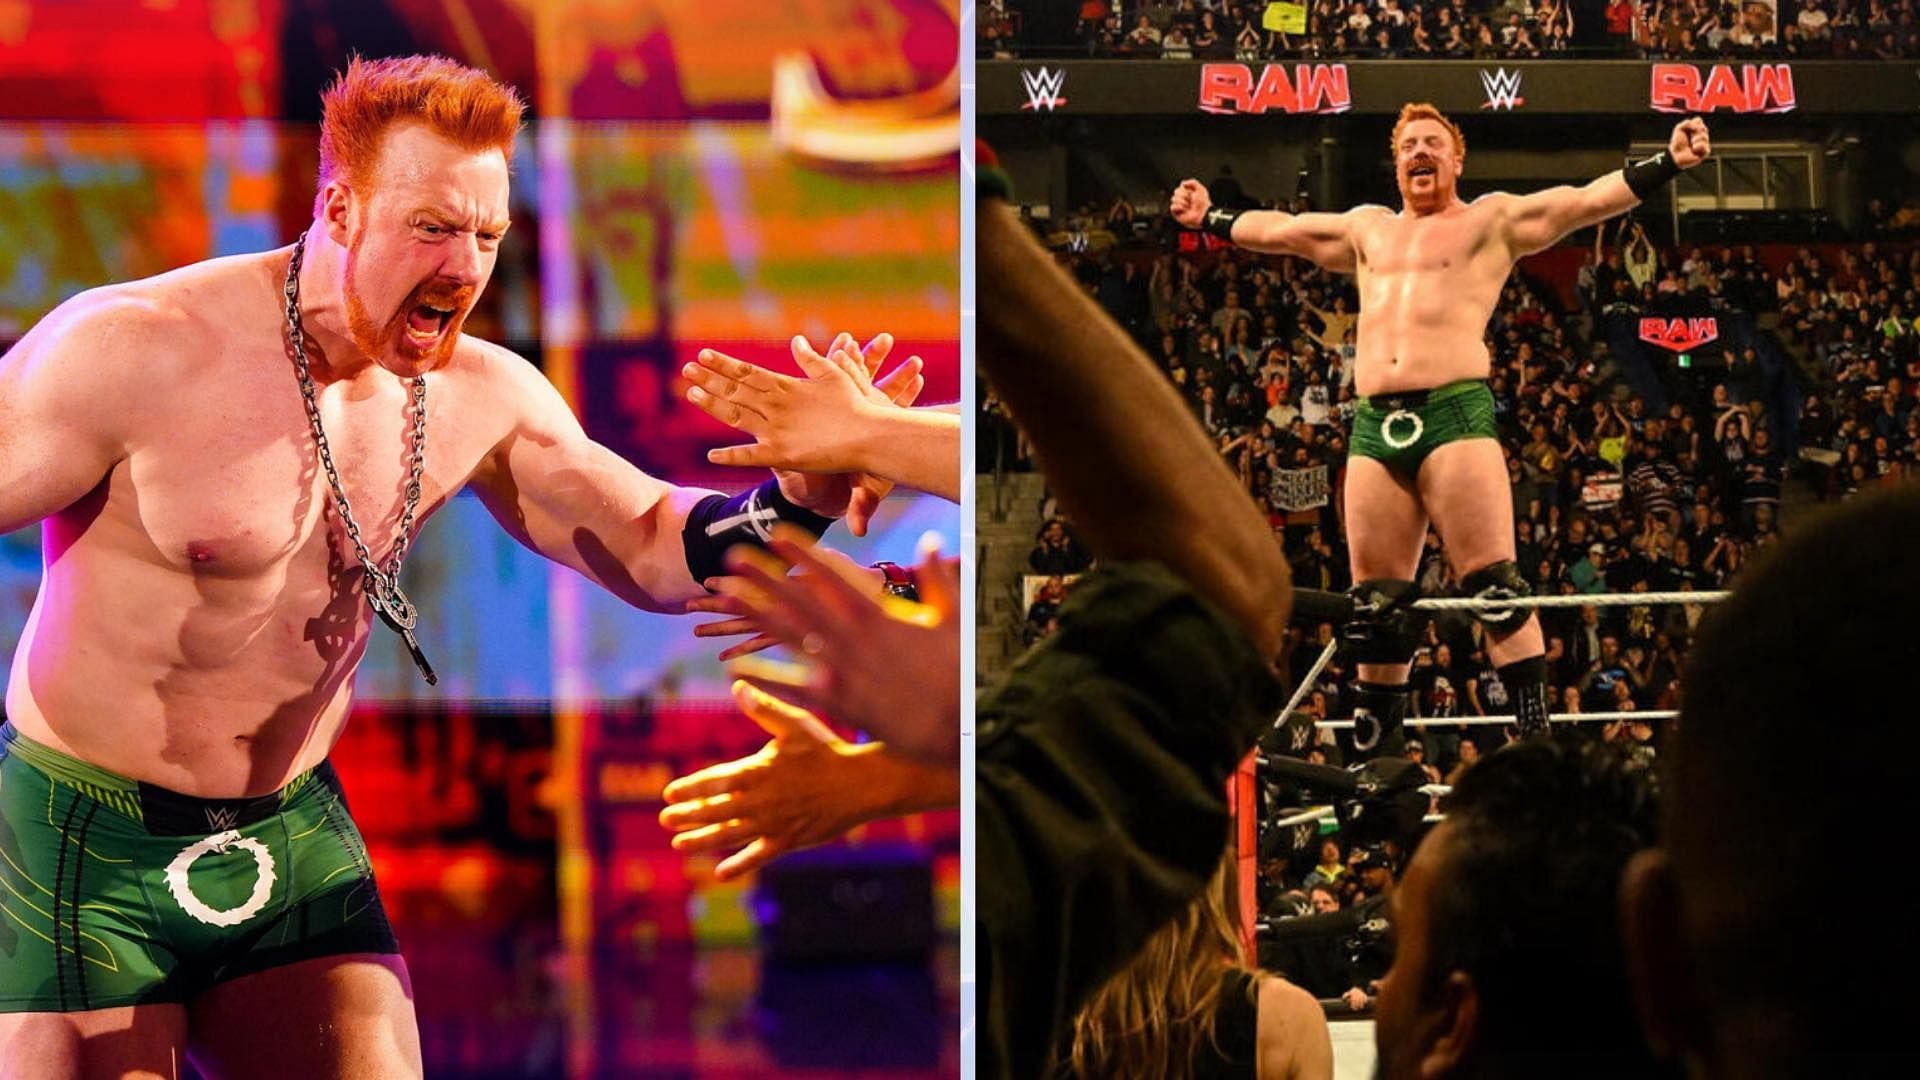 Sheamus is a 4-time WWE Champion